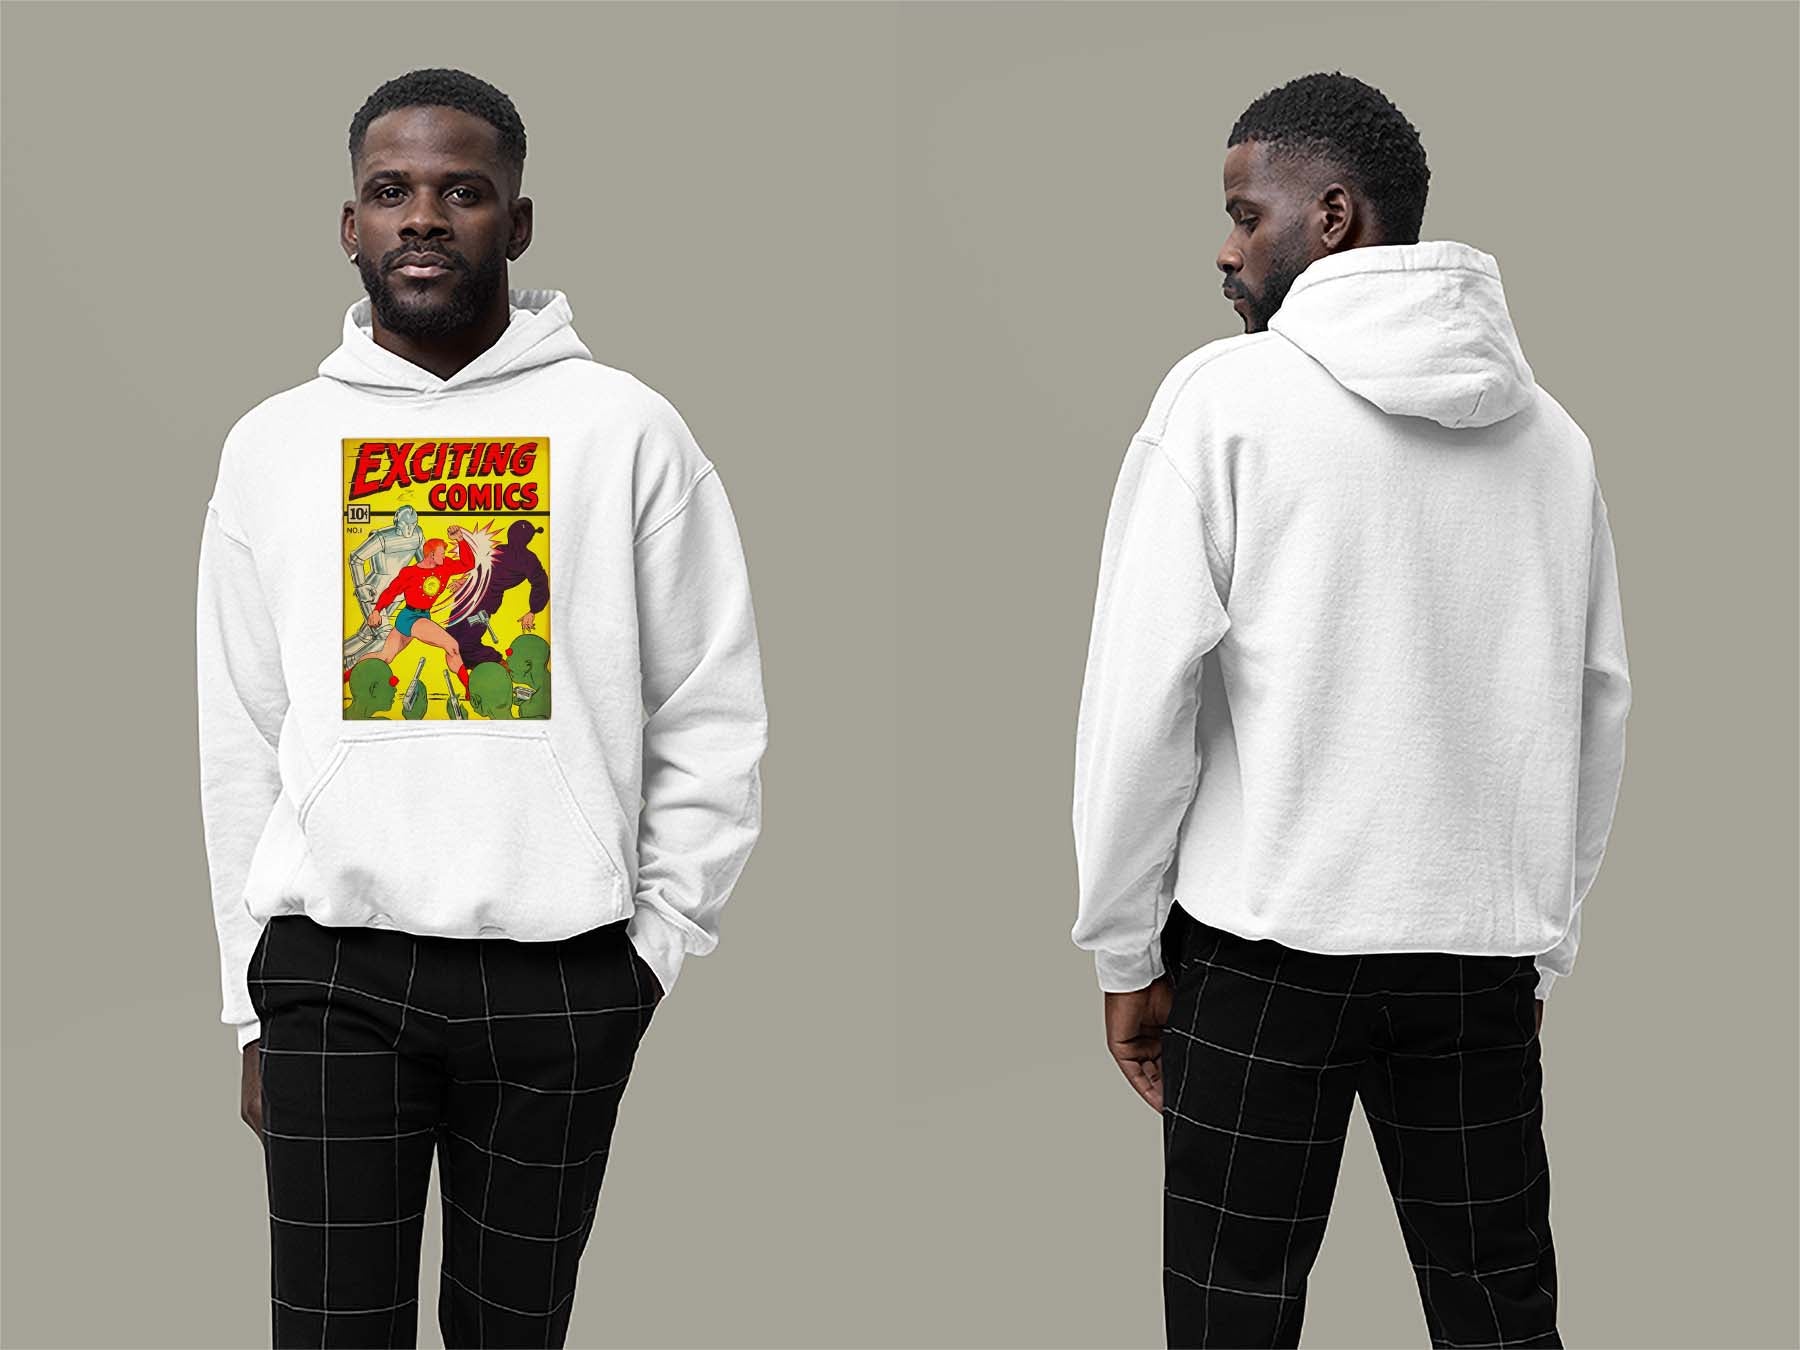 Exciting Comics No.1 Hoodie Small White